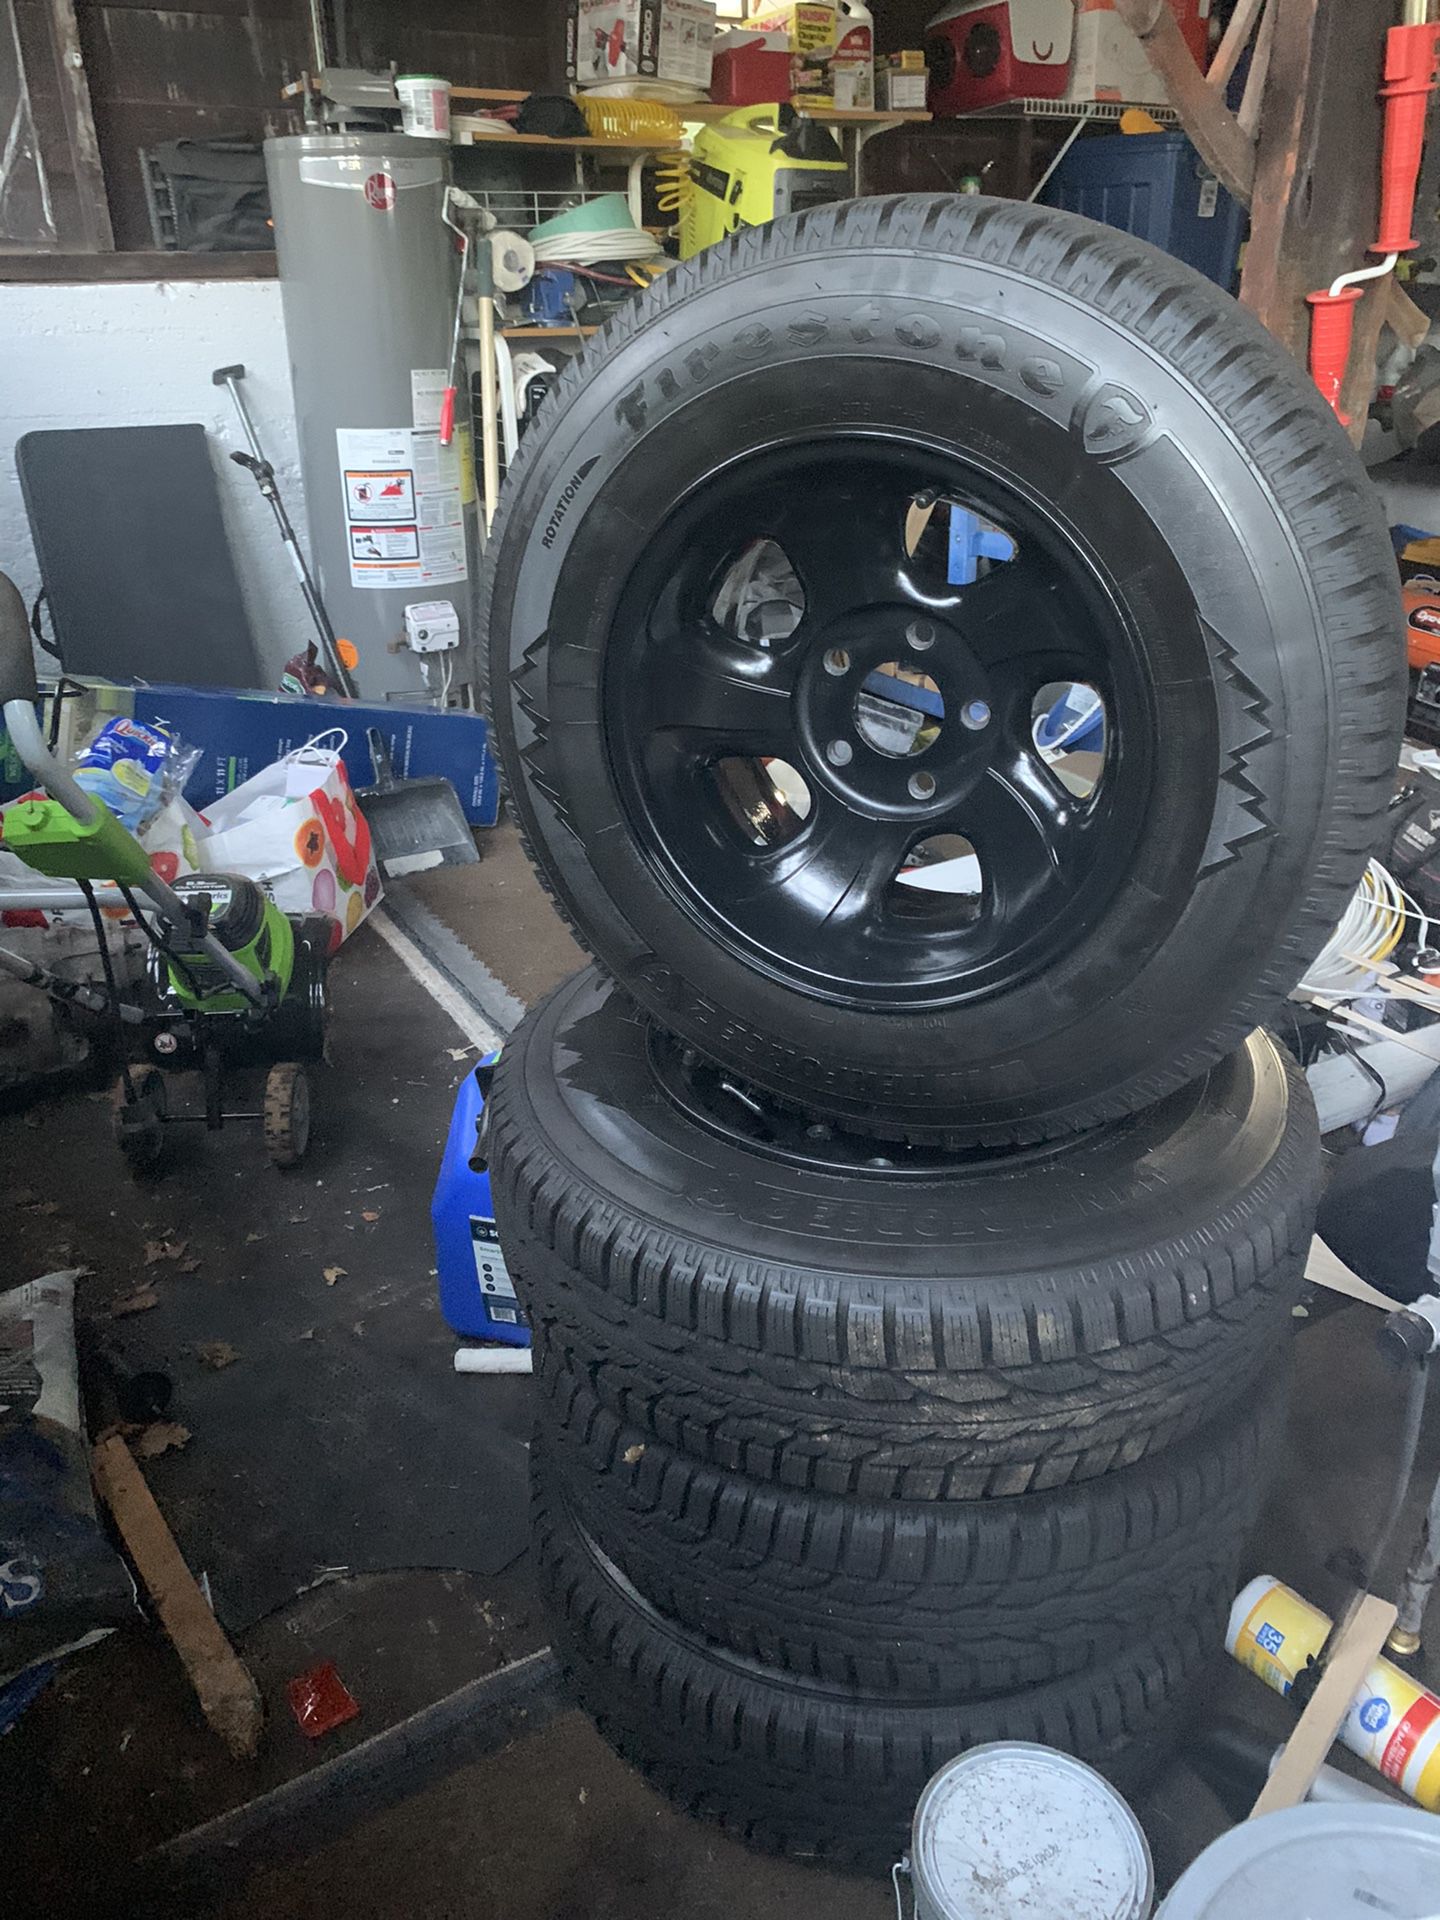 Chevy gmc rims black powder coating and snow tires